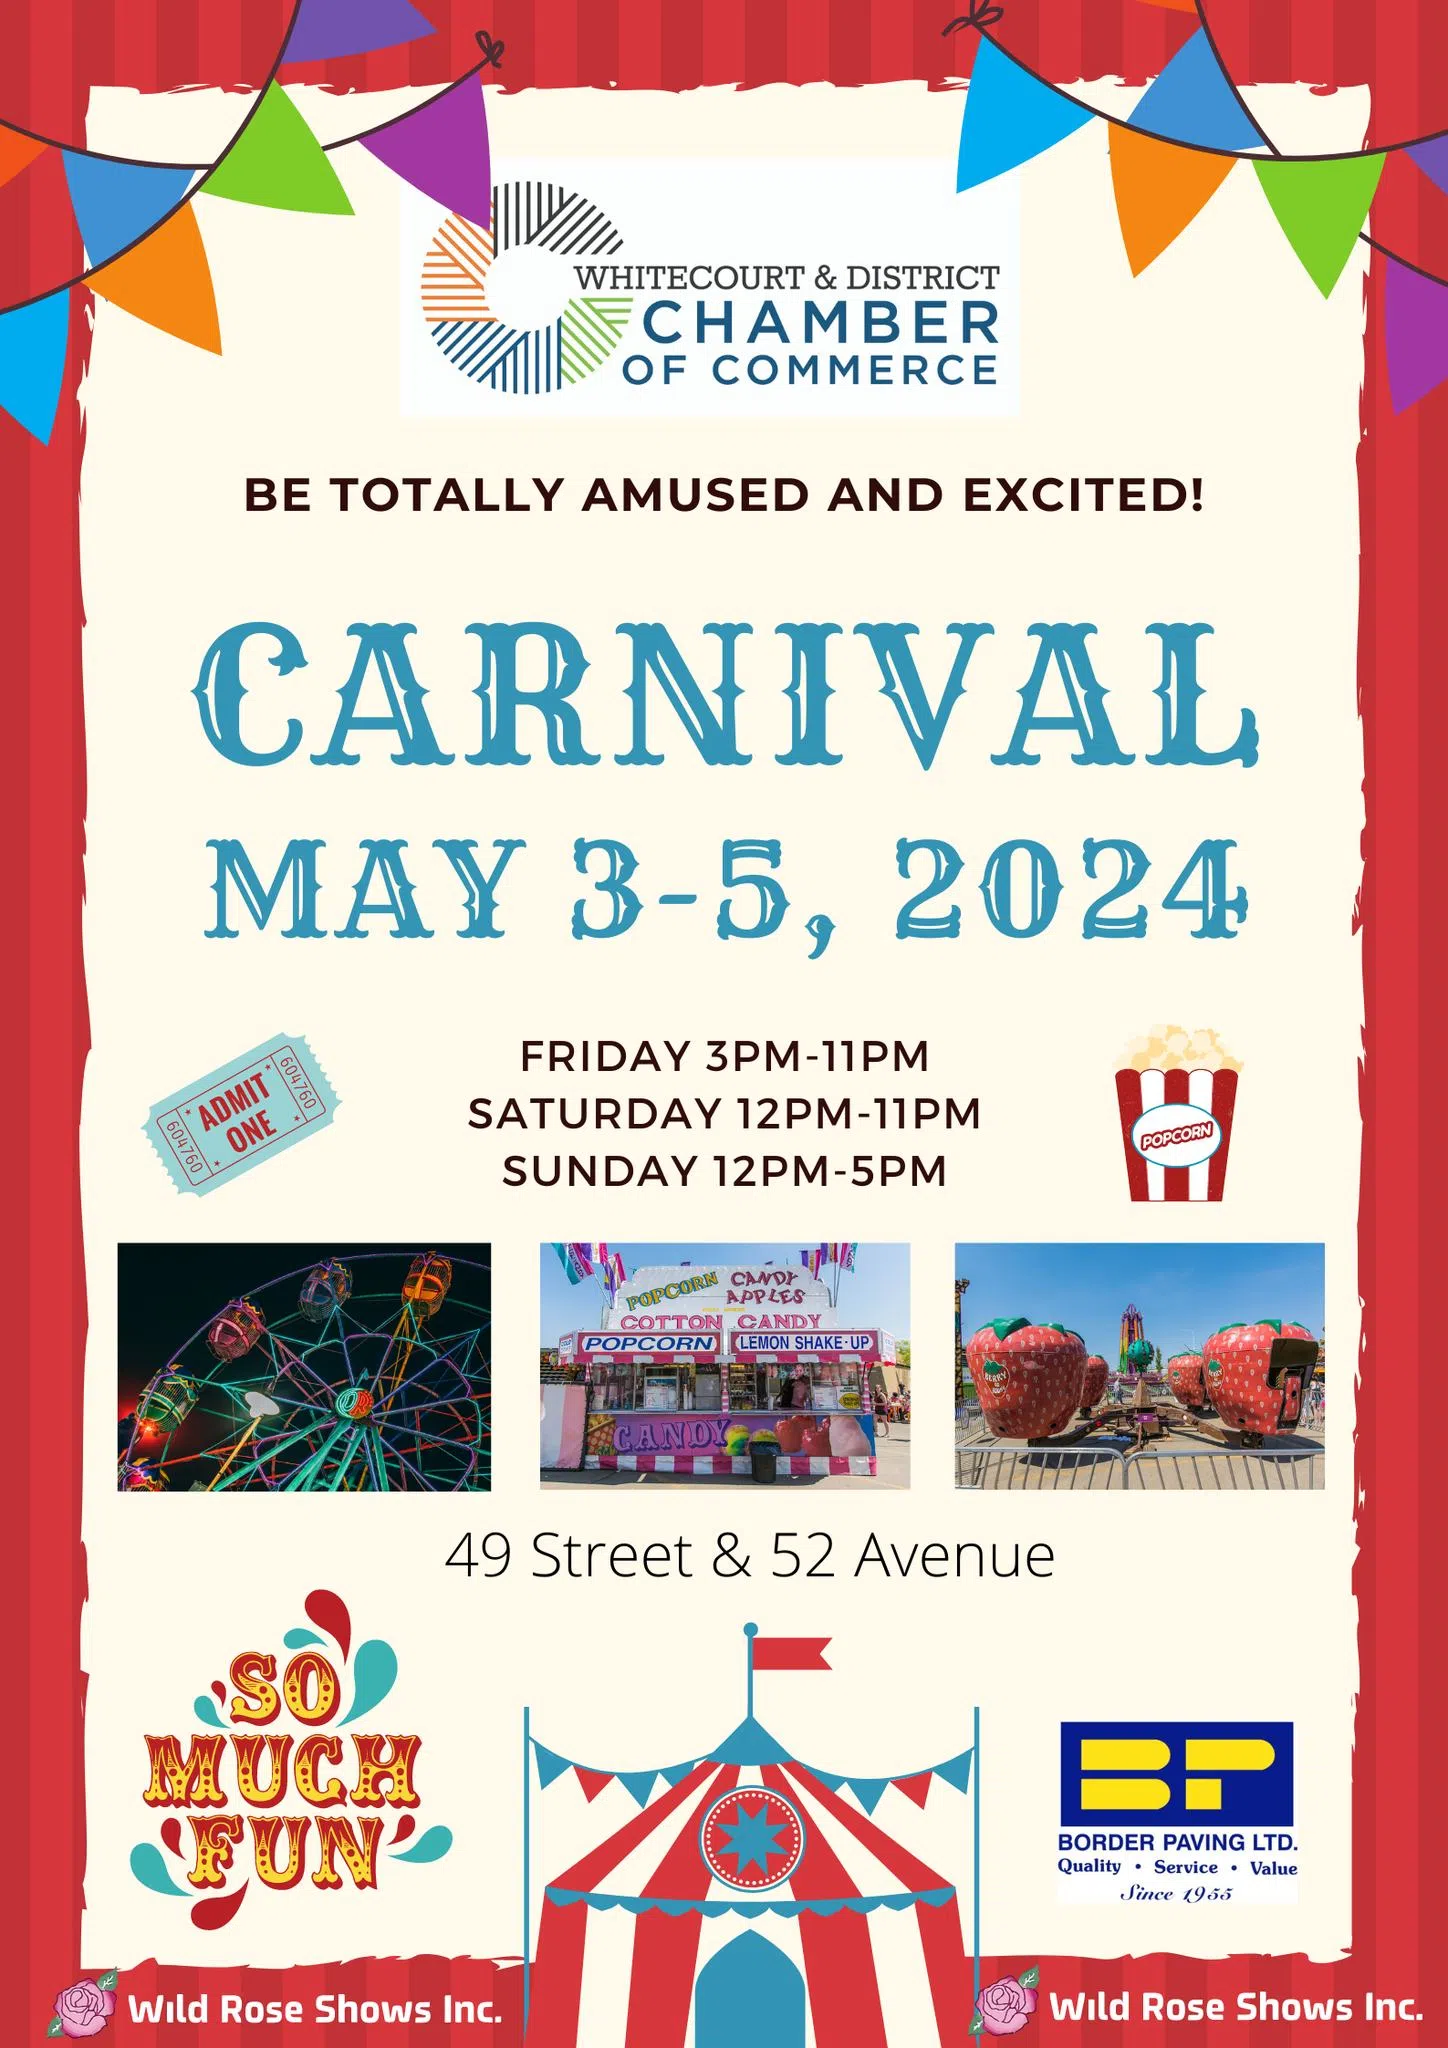 Chamber ready to host annual Whitecourt Carnival